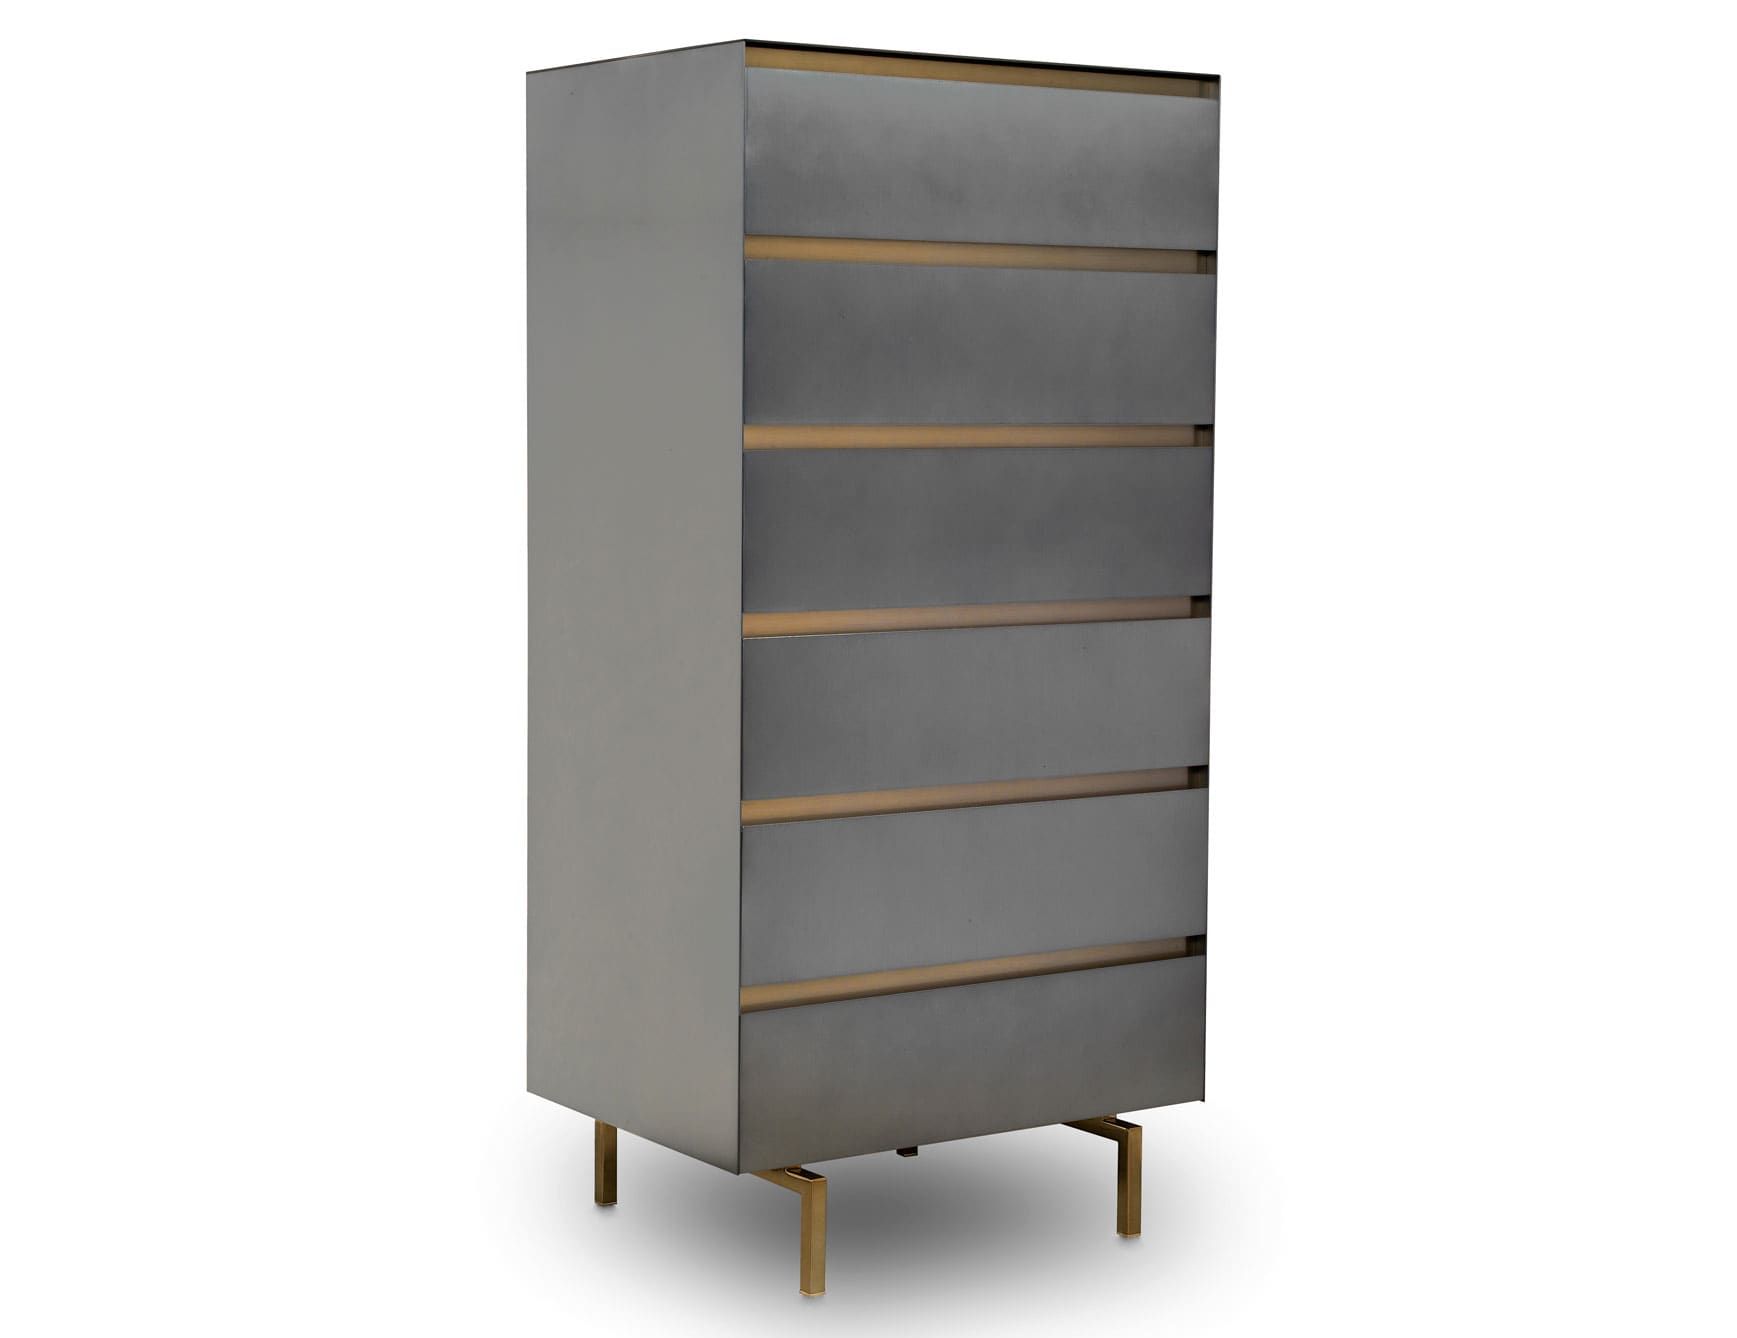 Blackgold contemporary Italian chest of drawers with grey metal